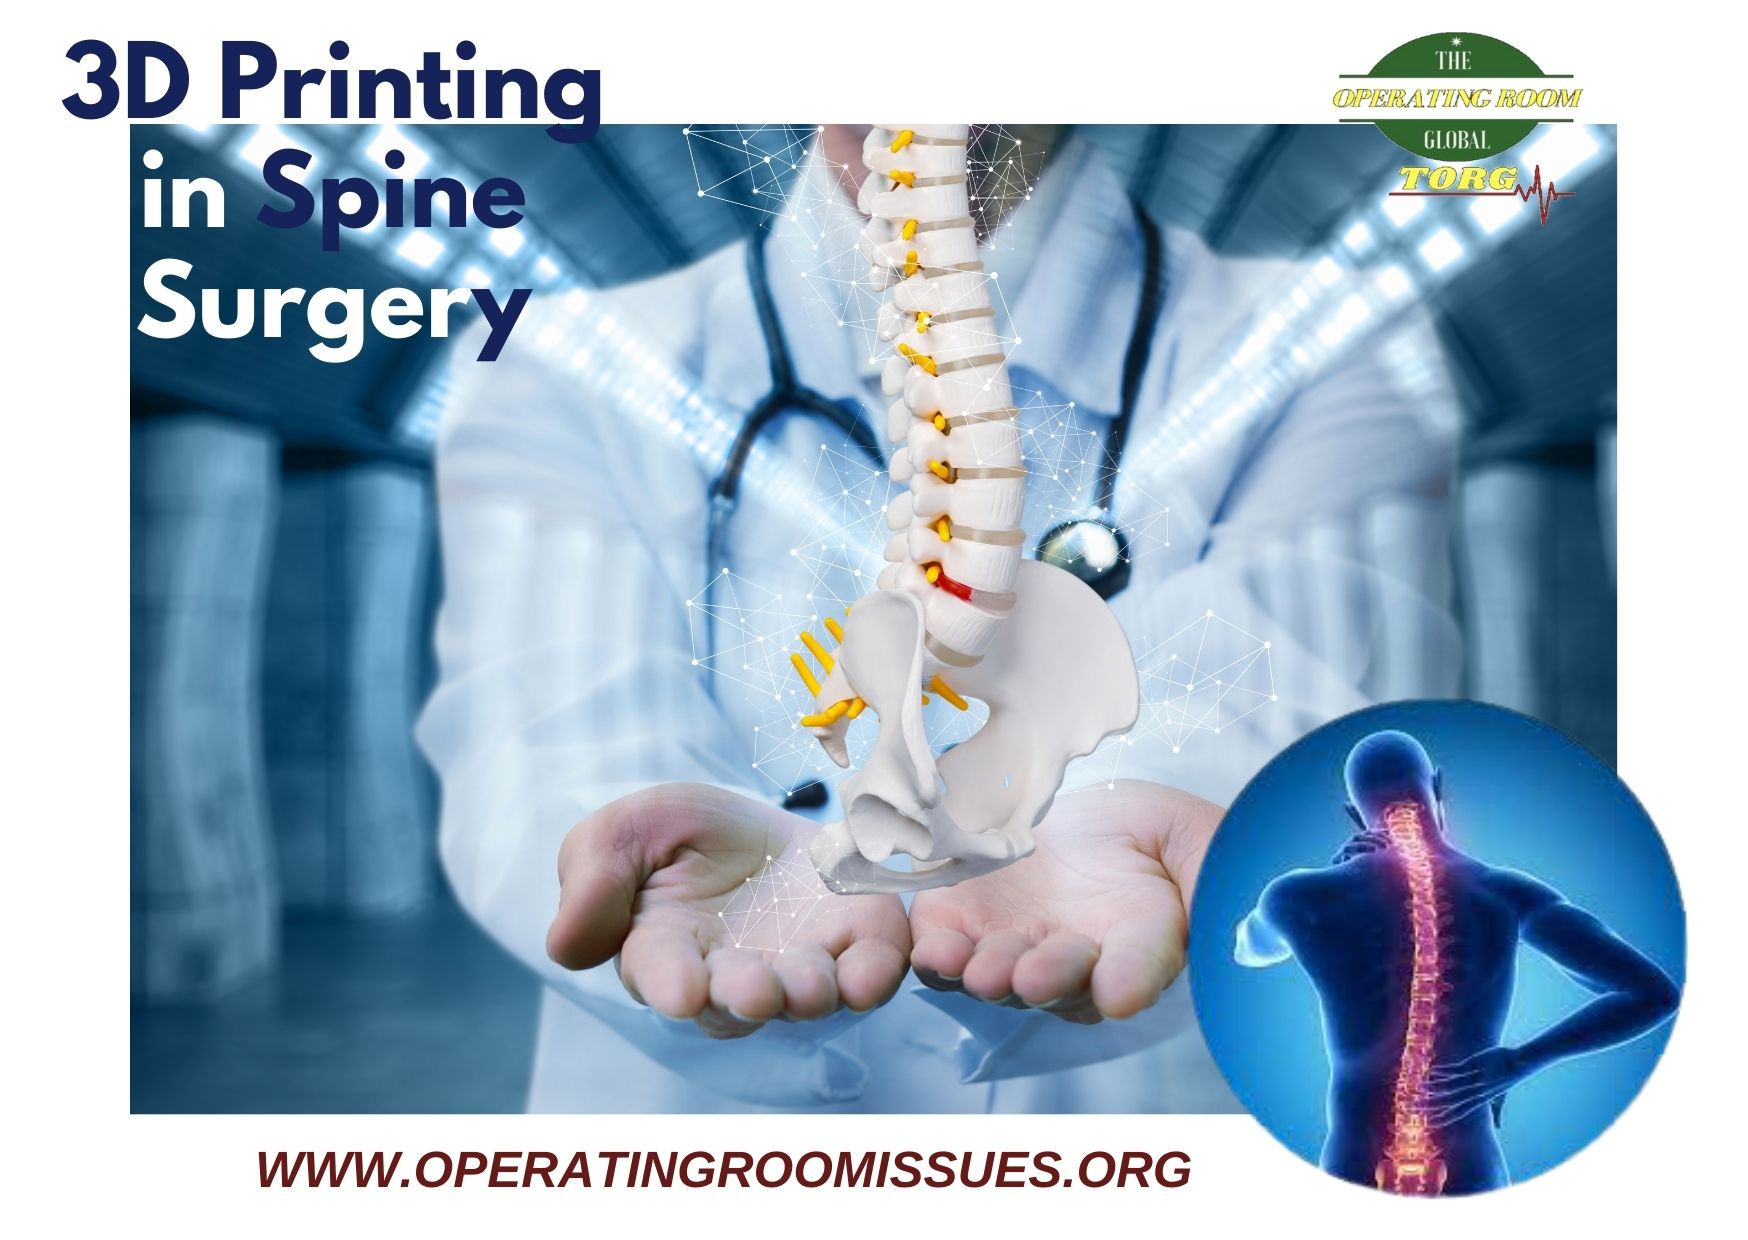 3D Printing in Spine Surgery – The prediction of surgeons